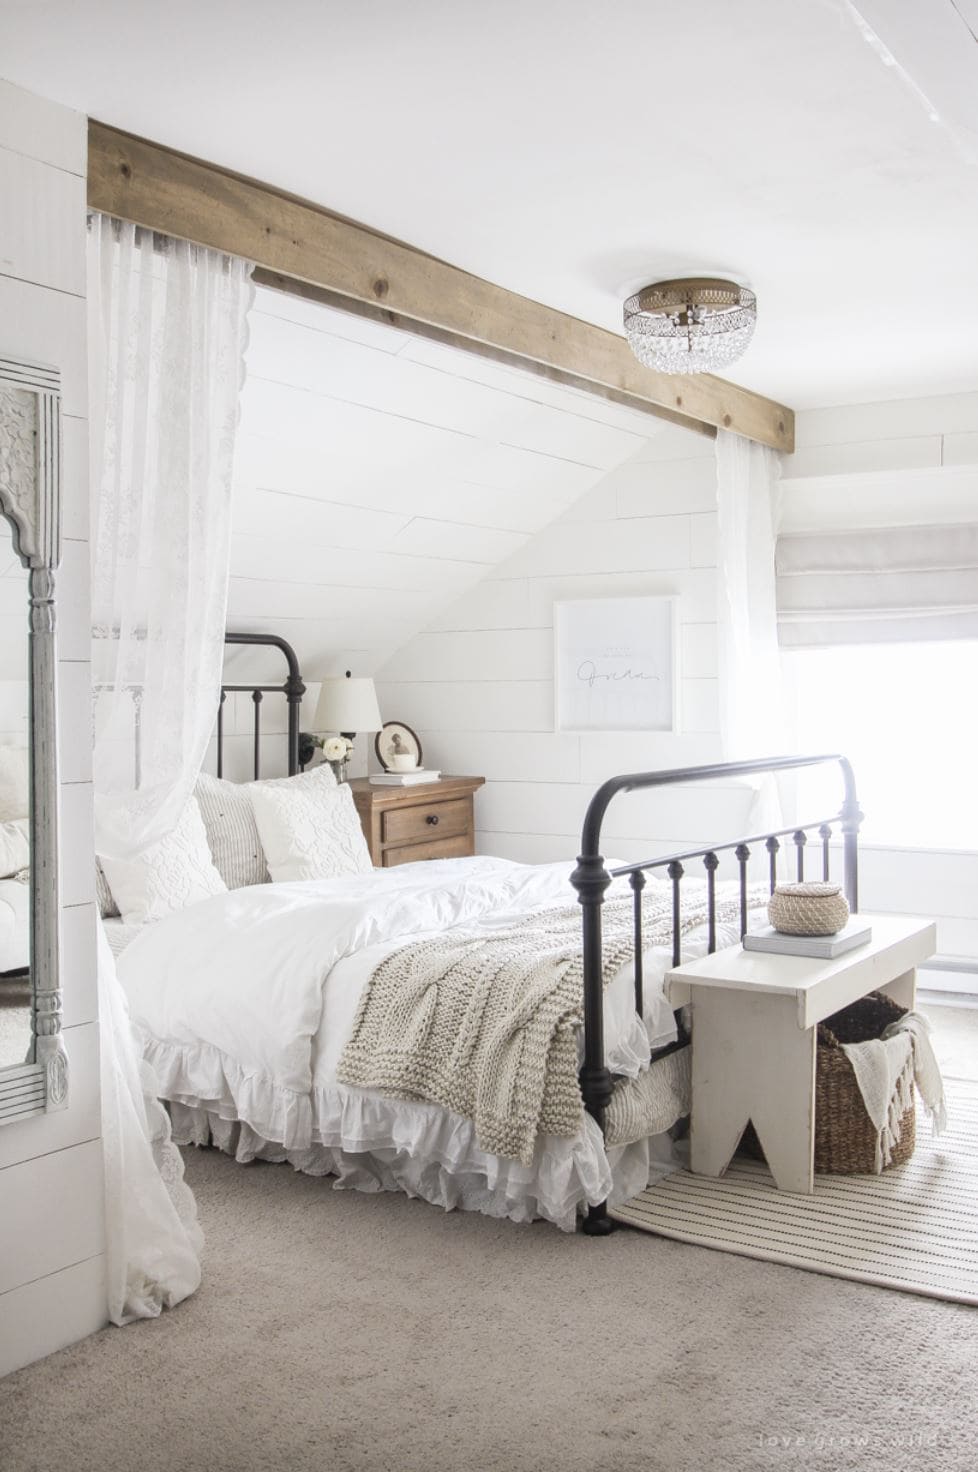 A feminine bedroom with white shiplap walls, lacy bedding and a beam with lace curtains hanging down.